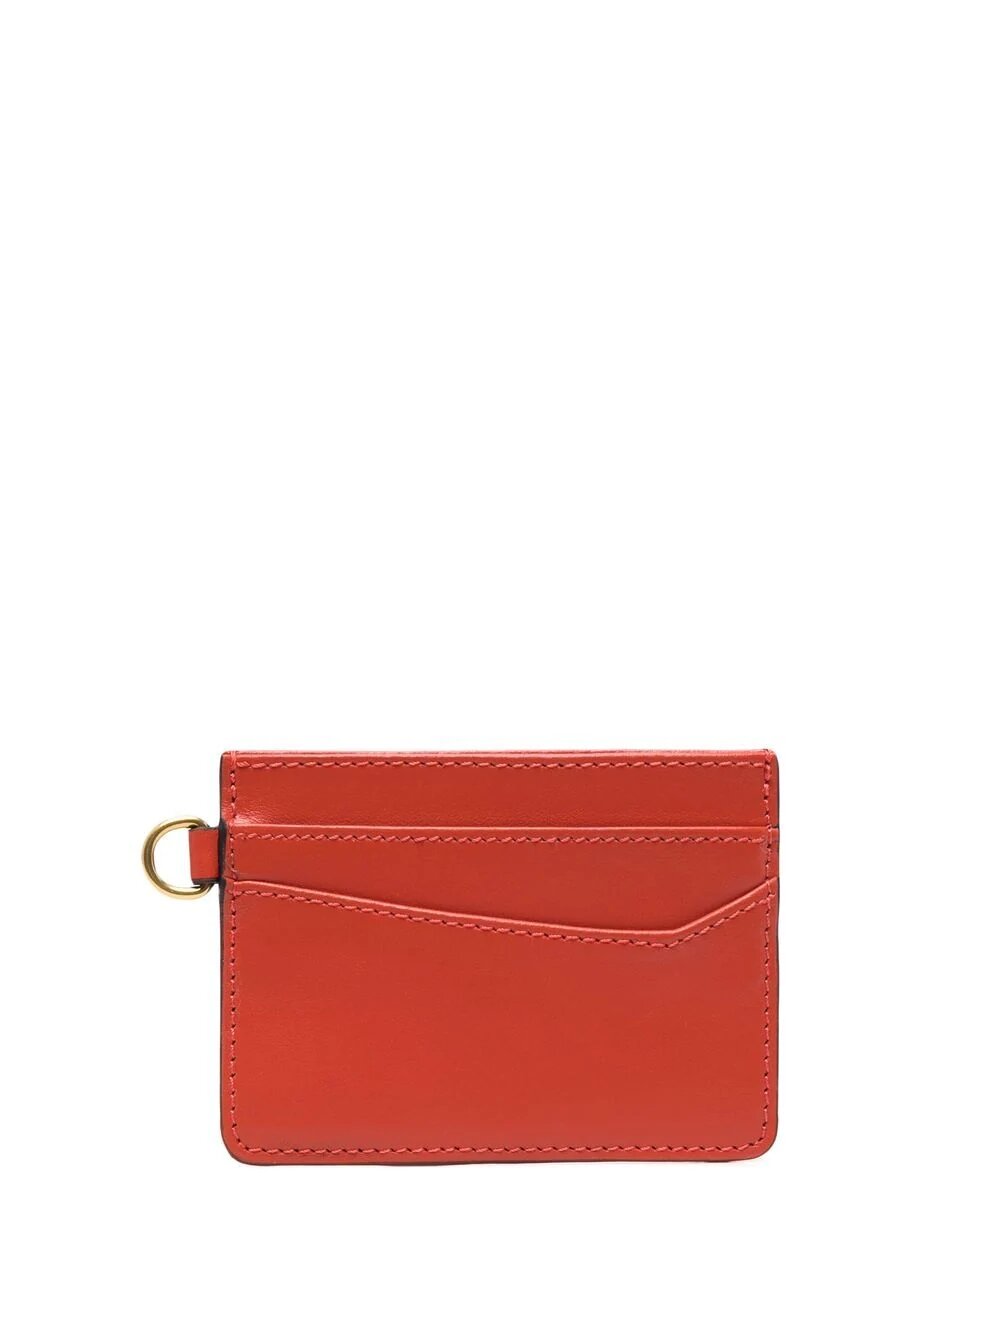 NYSBEN Small Leather Goods